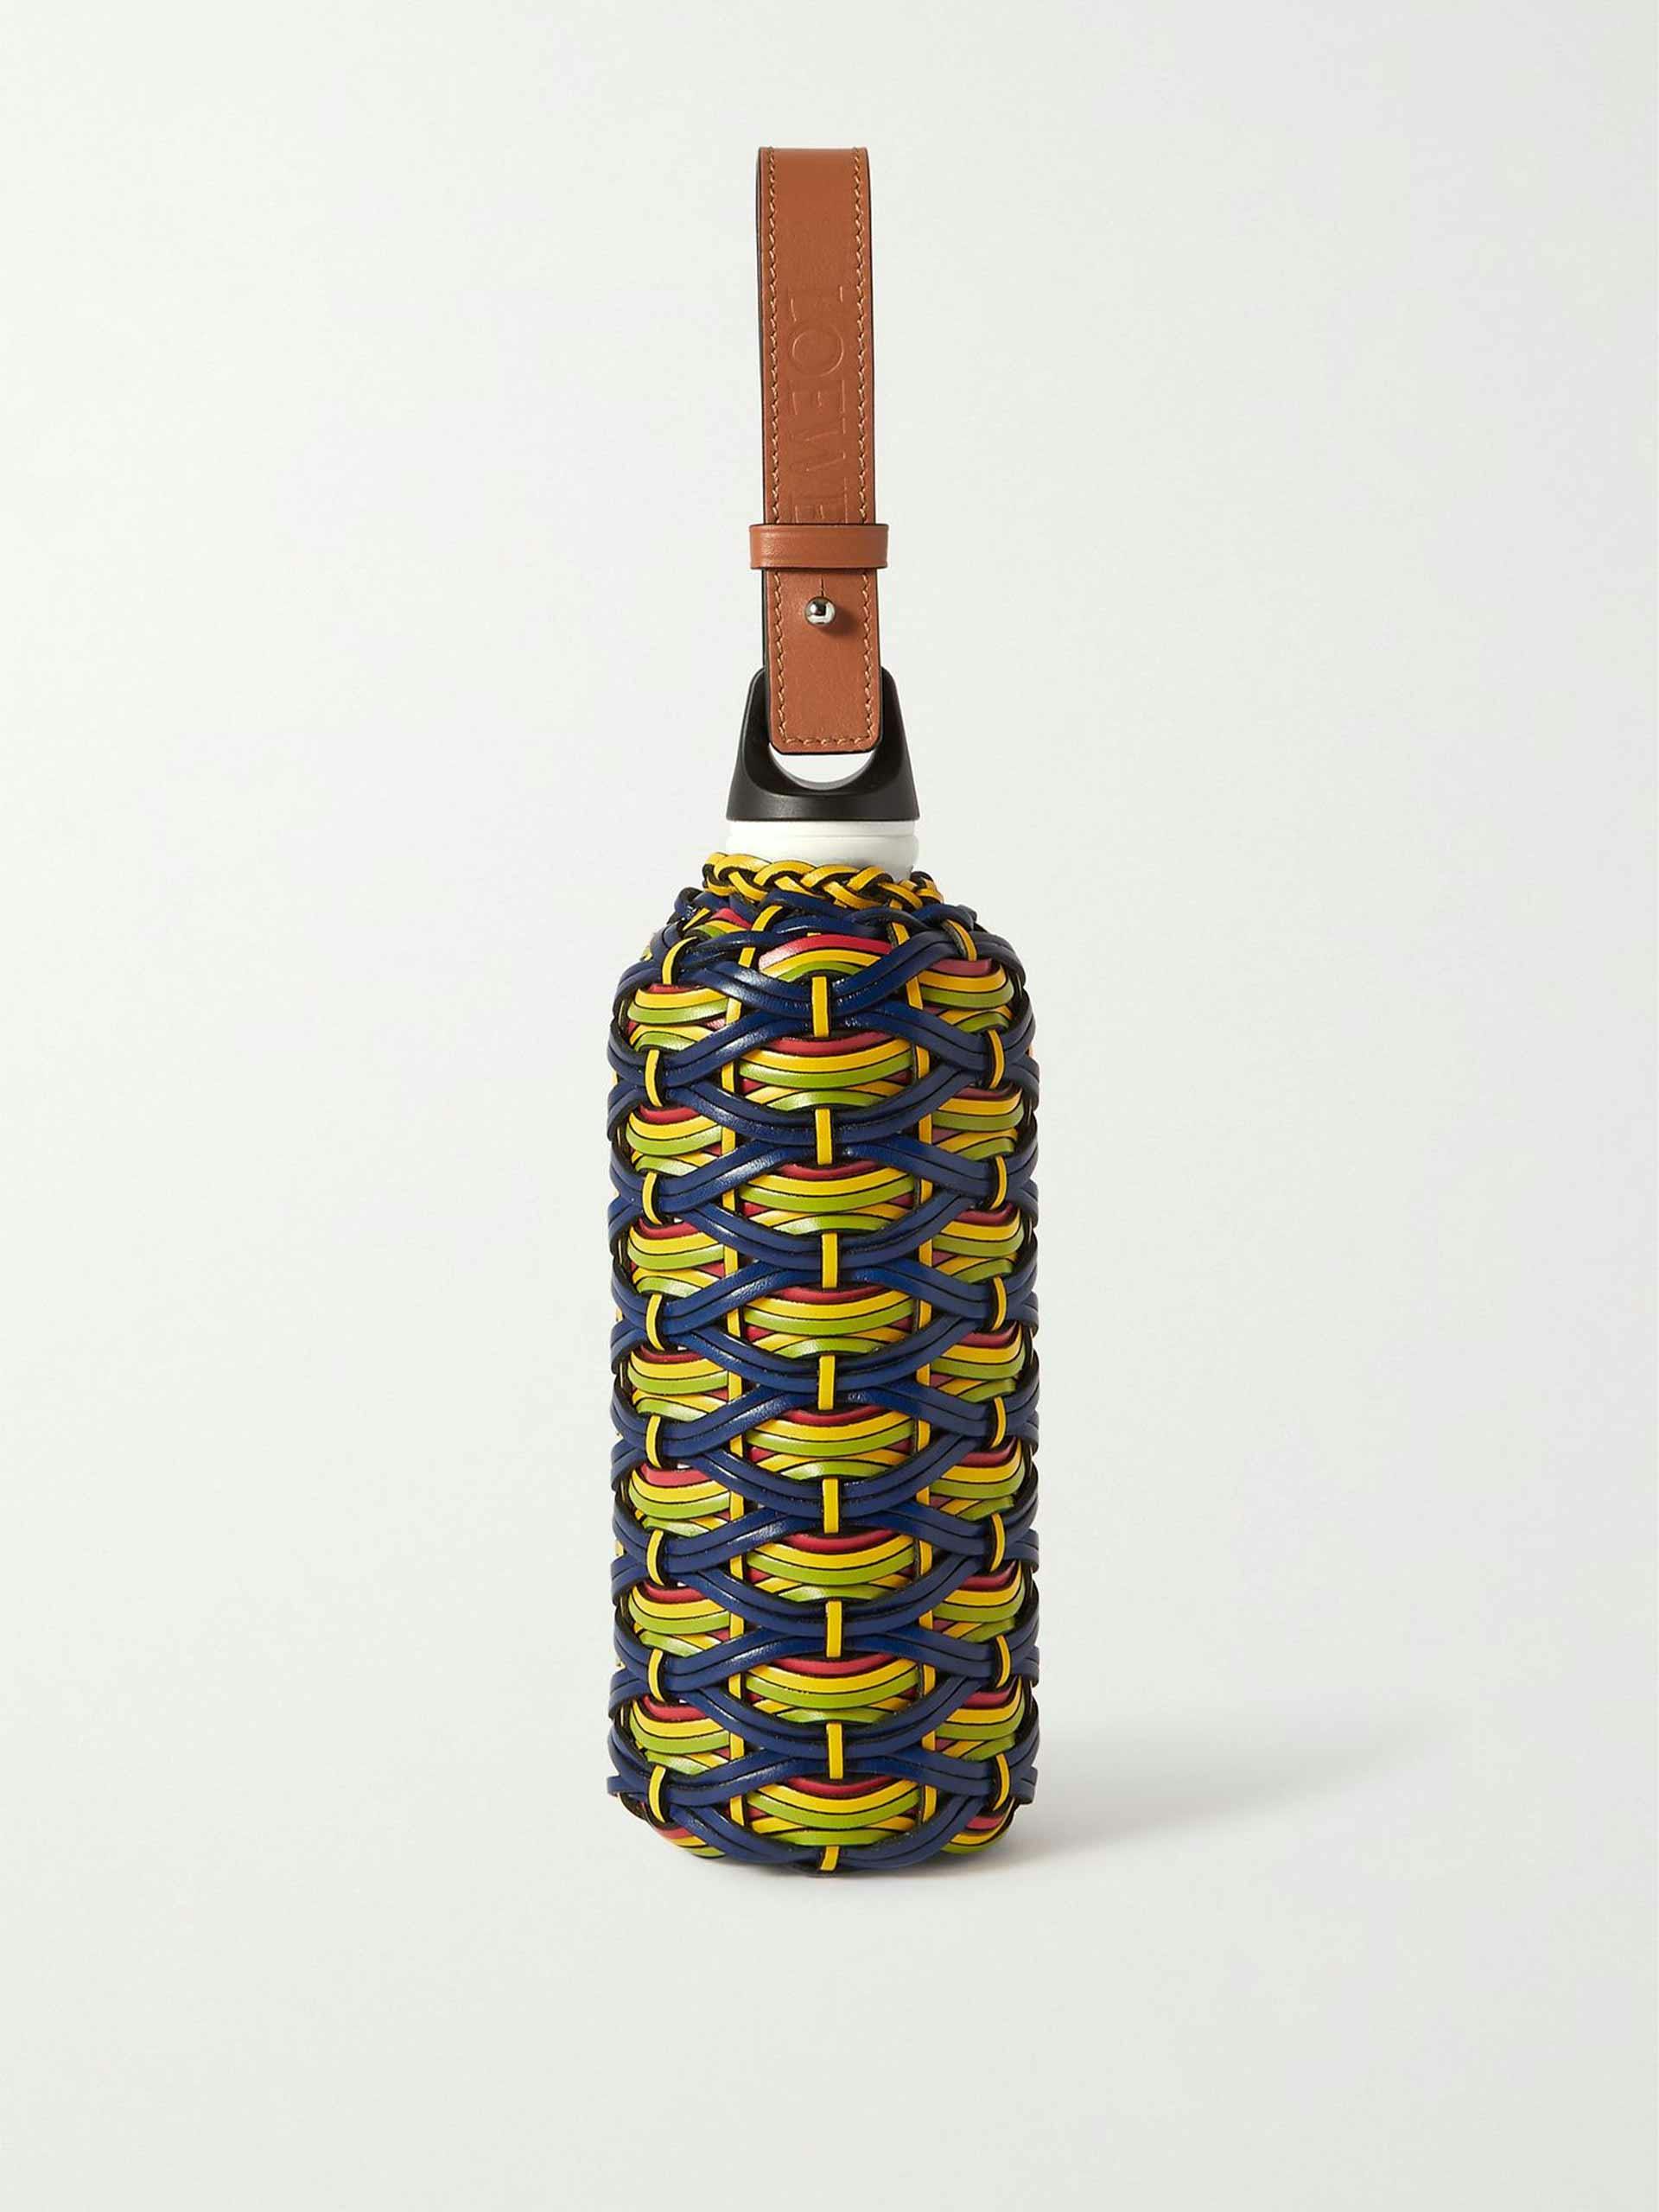 Braided leather and aluminum water bottle